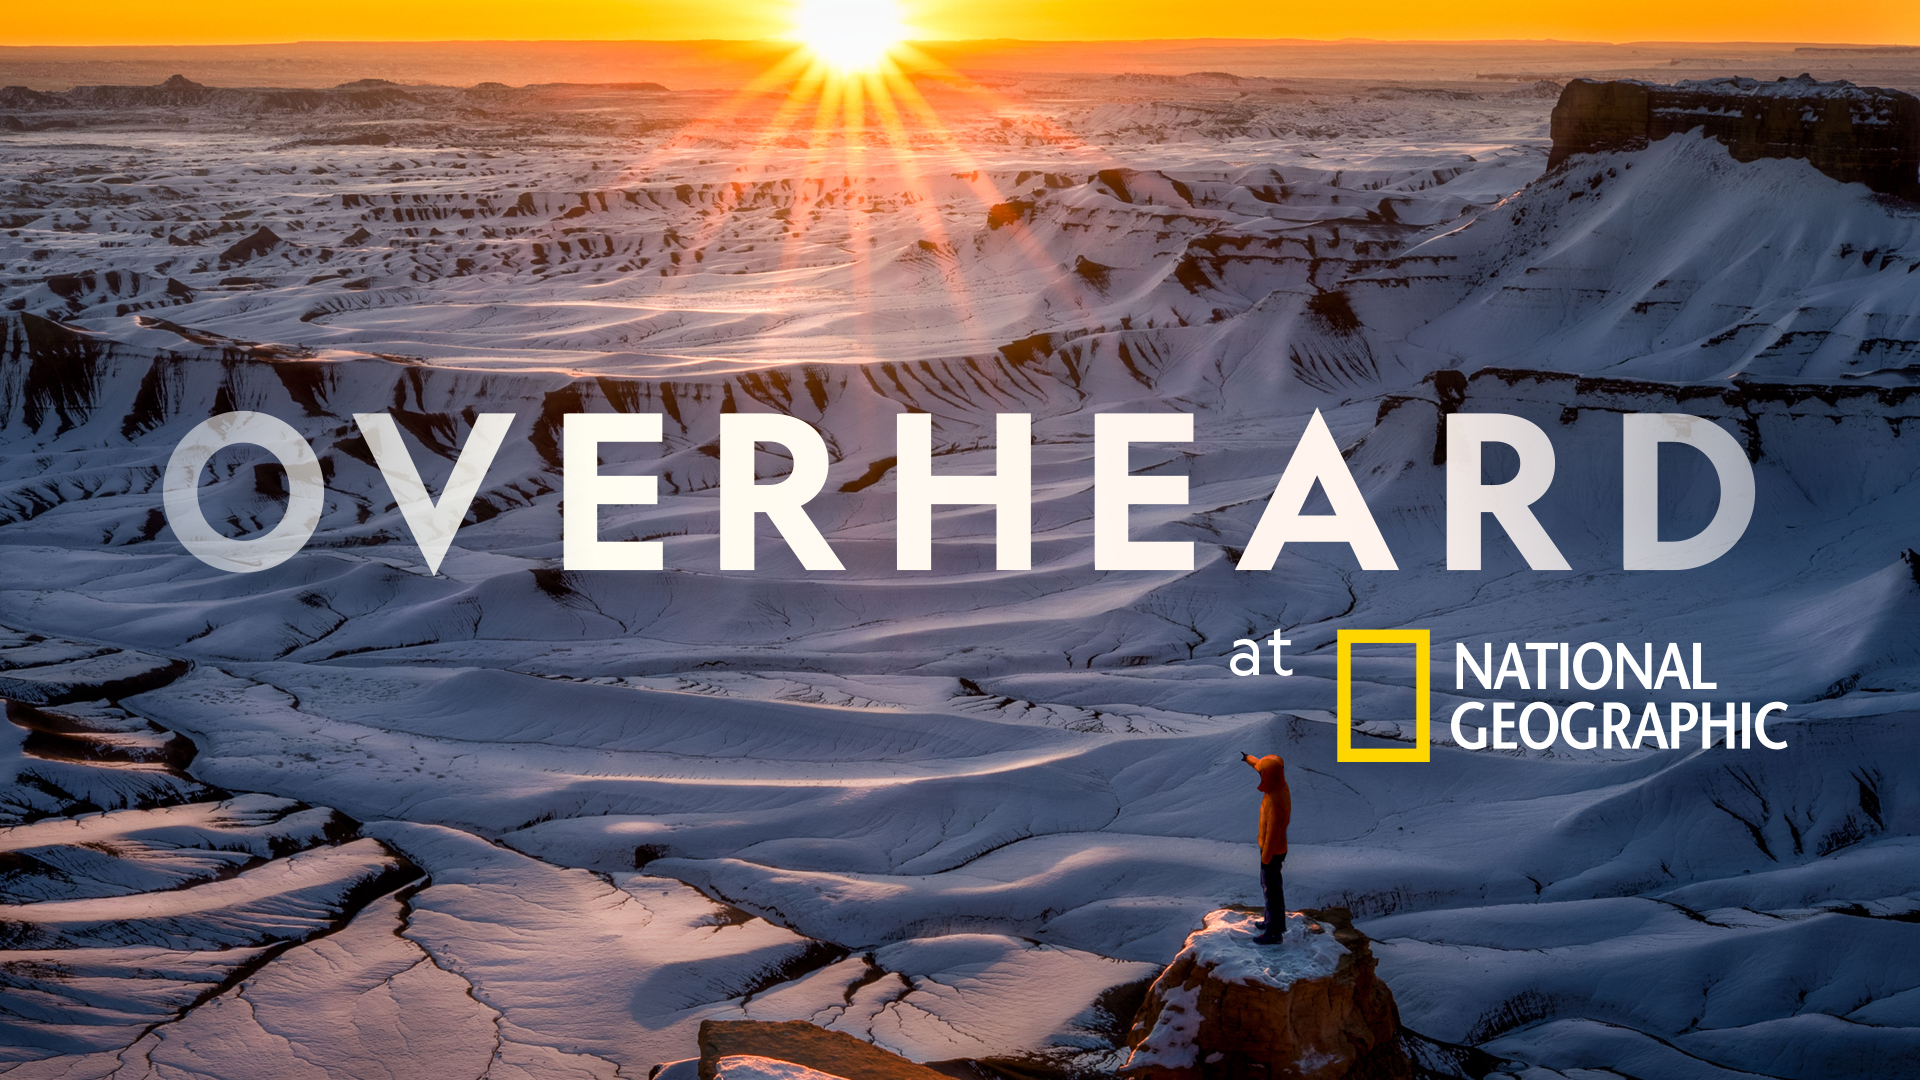 National Geographic’s ‘Overheard at National Geographic’ Podcast Returns for Season Four